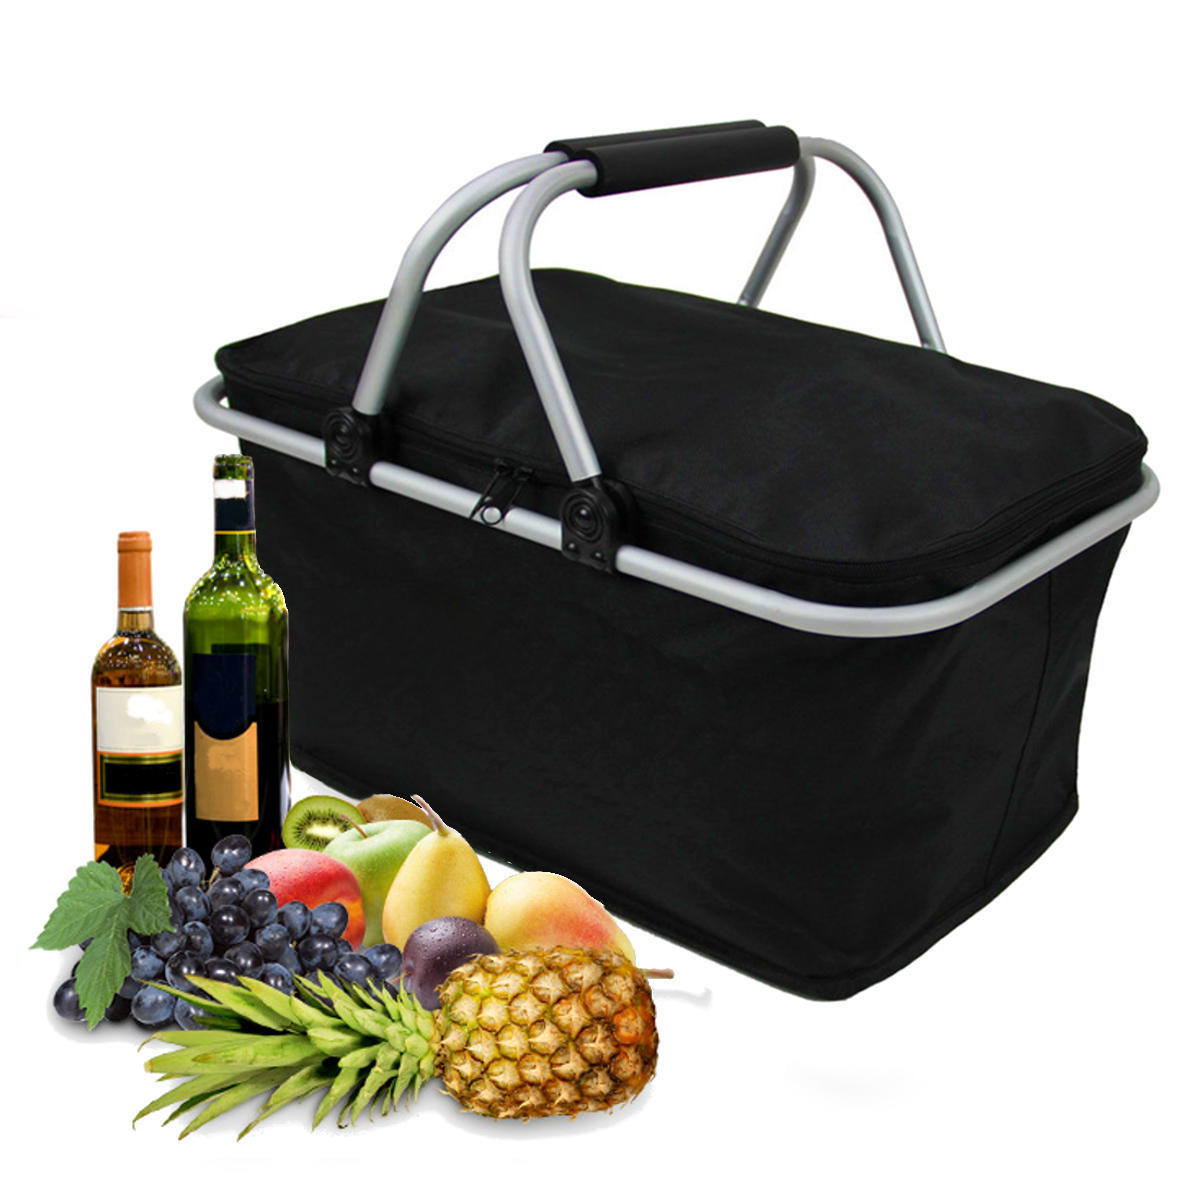 Insulated Folding Picnic Cooler Basket with Handles - Black